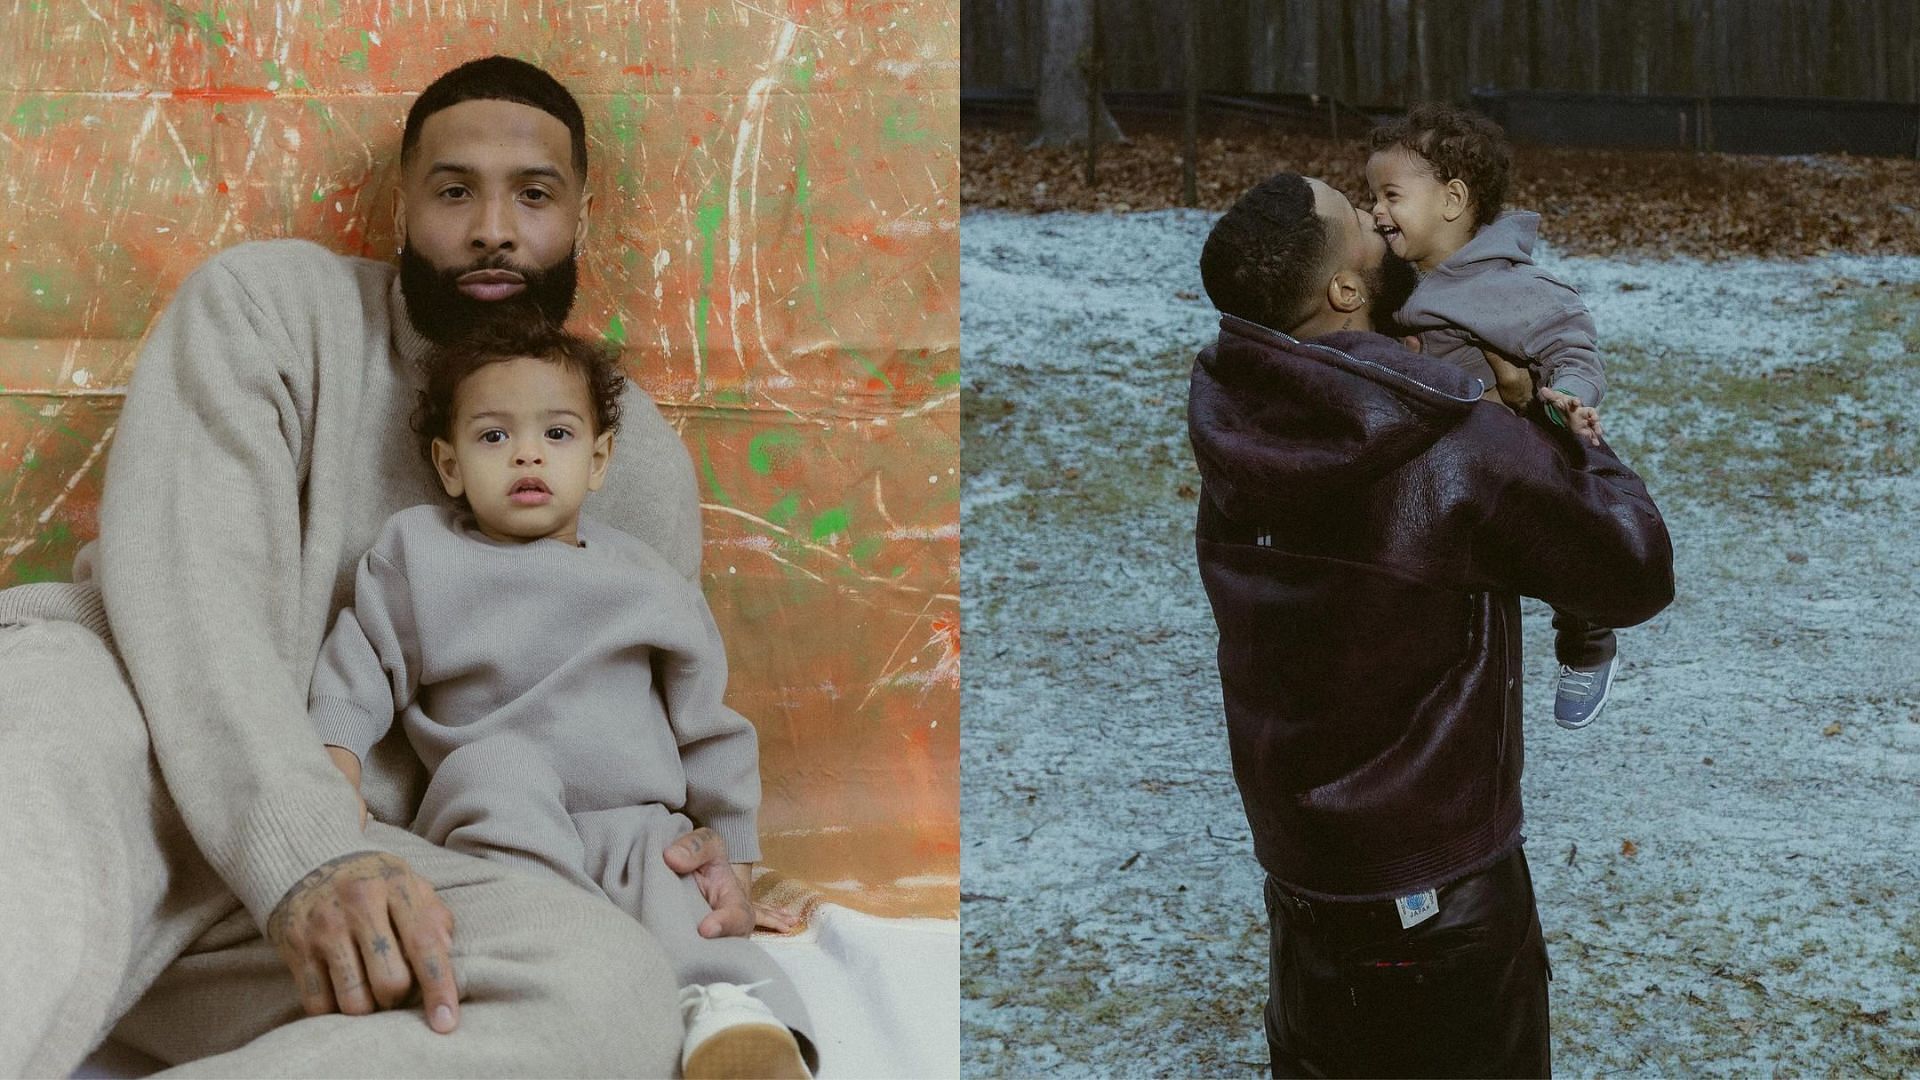 Odell Beckham and his son Zydn